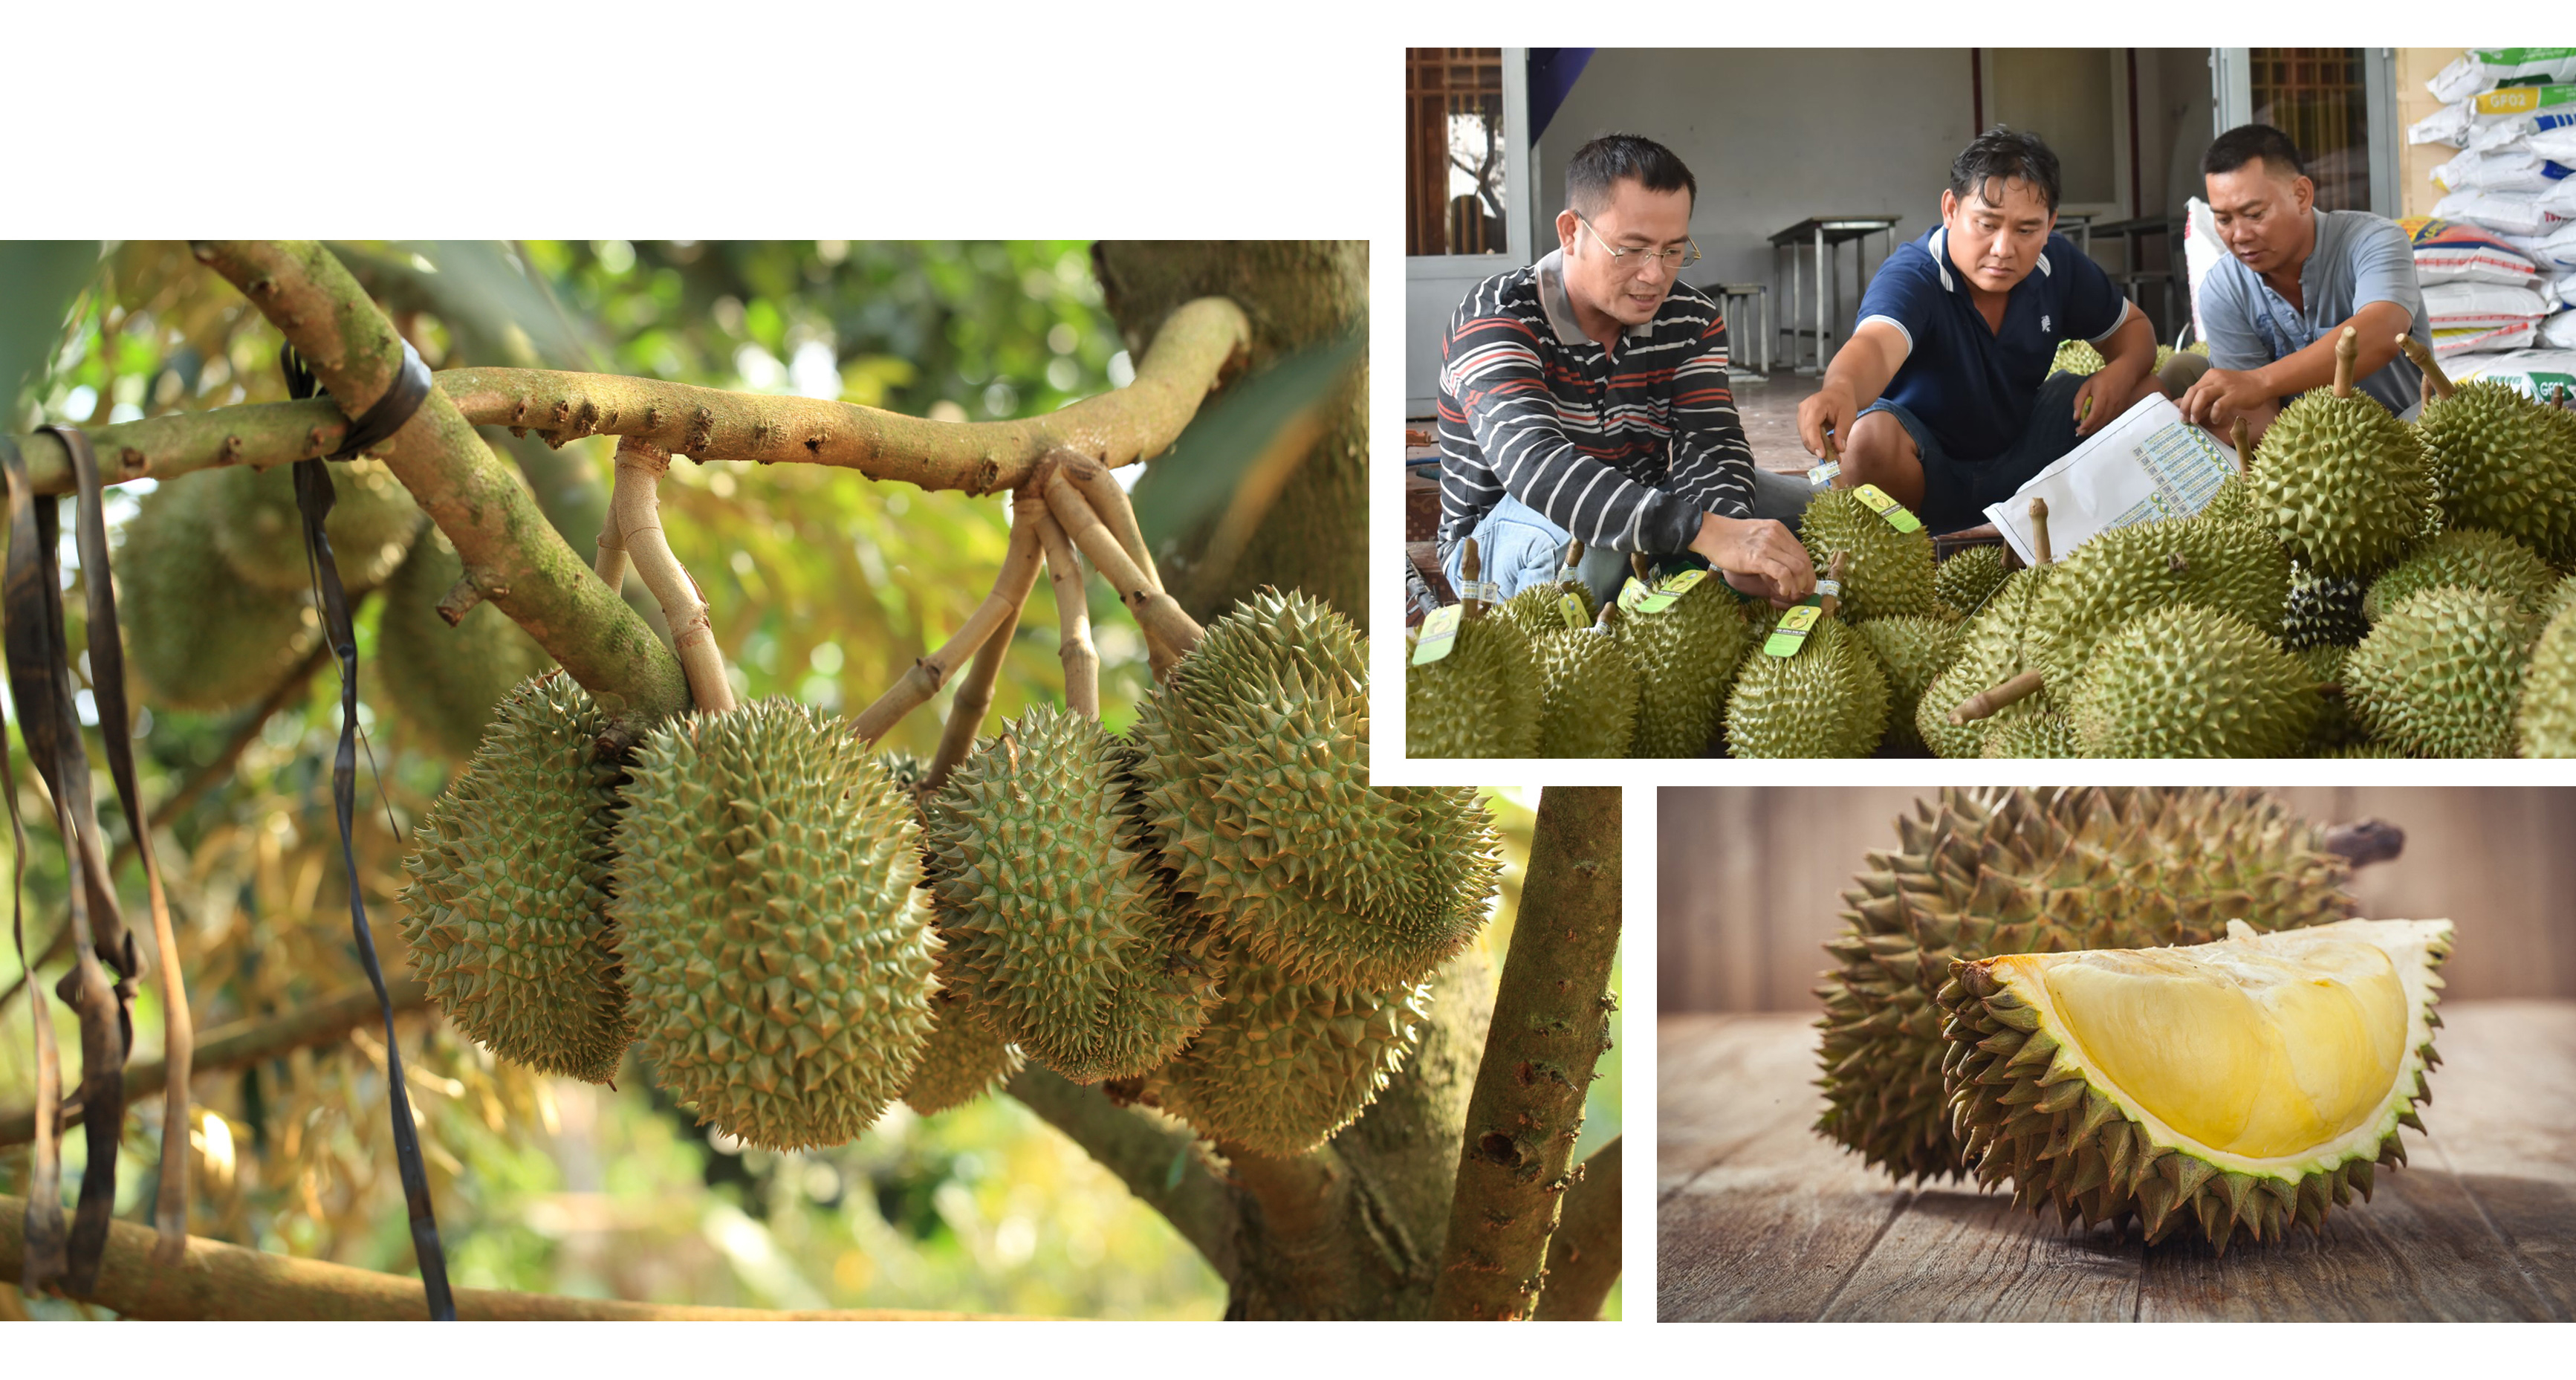 Qualified durians are selected for export. Photo: Tung Dinh.